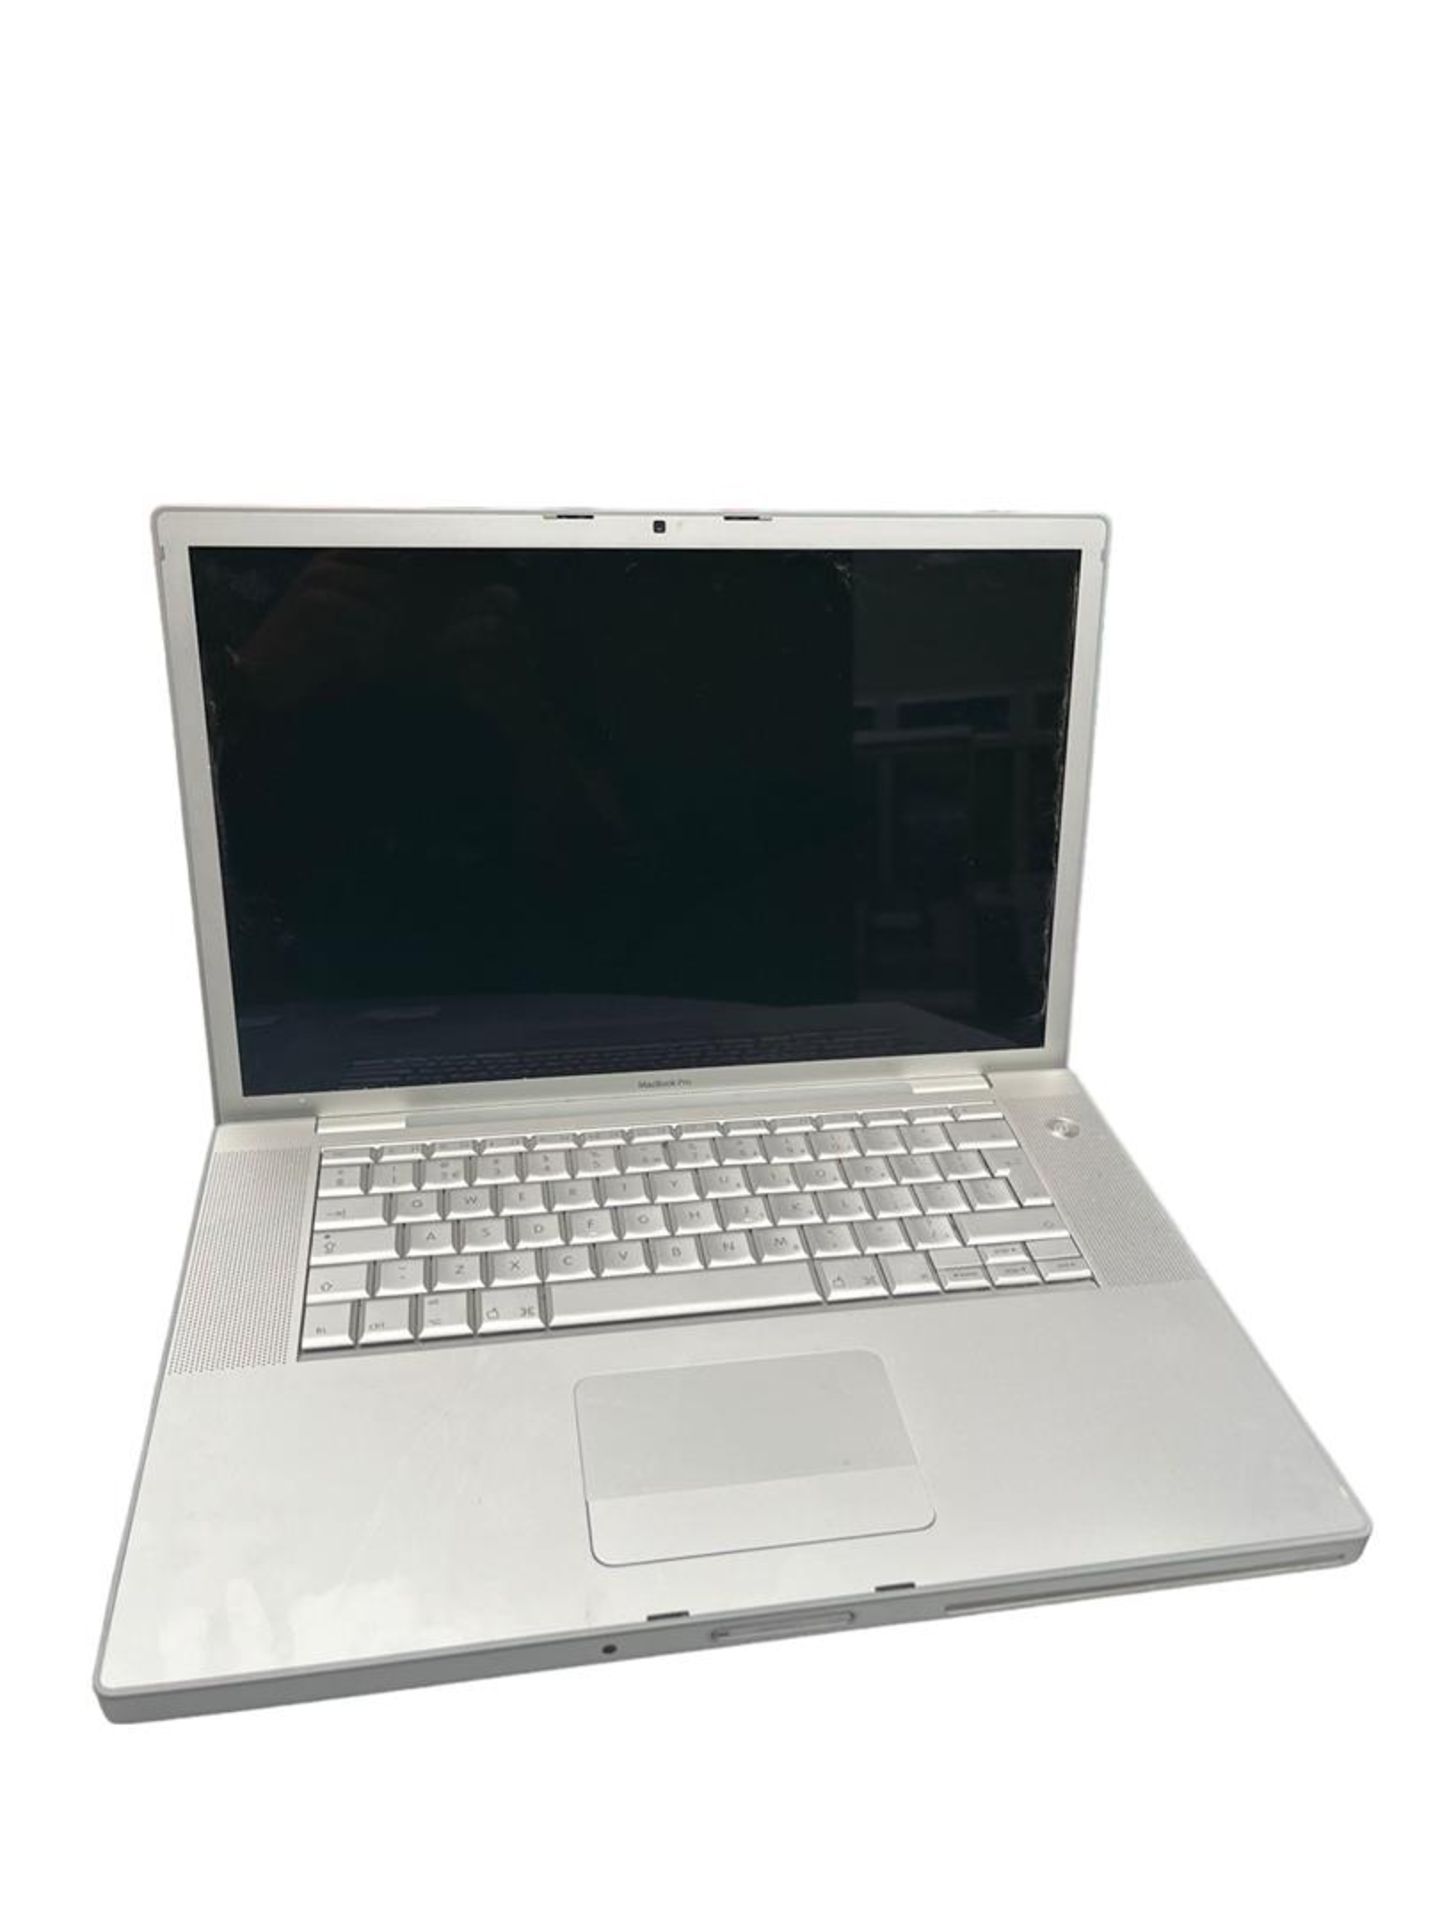 Apple MacBook Pro 15 inches, model number A1226. Without charger, not tested.